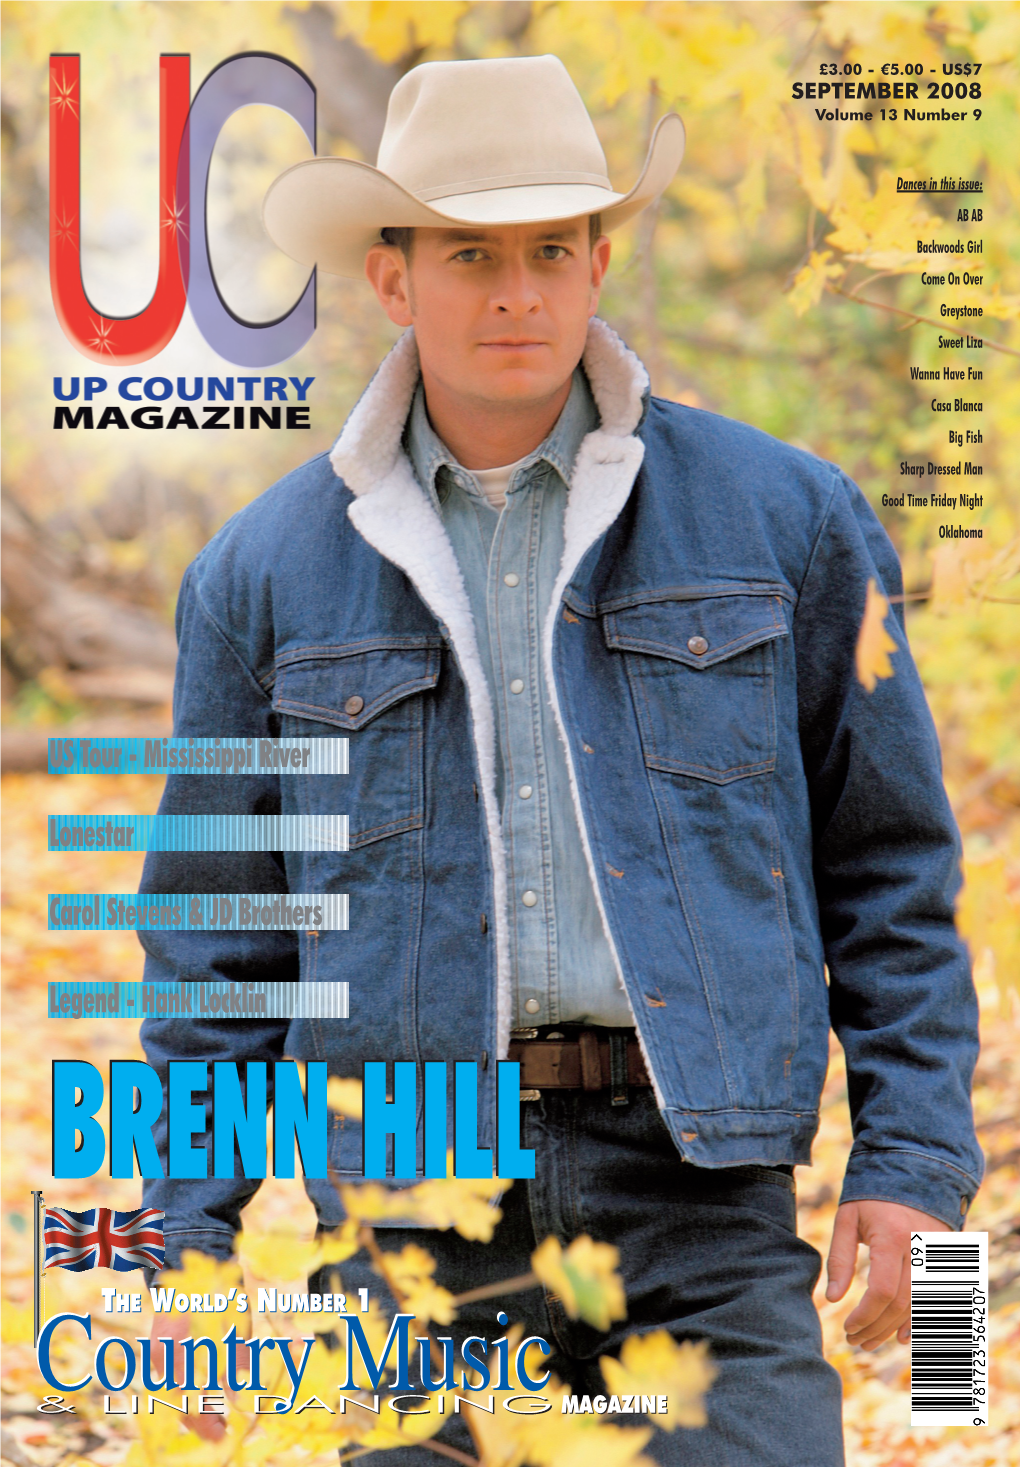 Up Country Magazine SEPT 2008